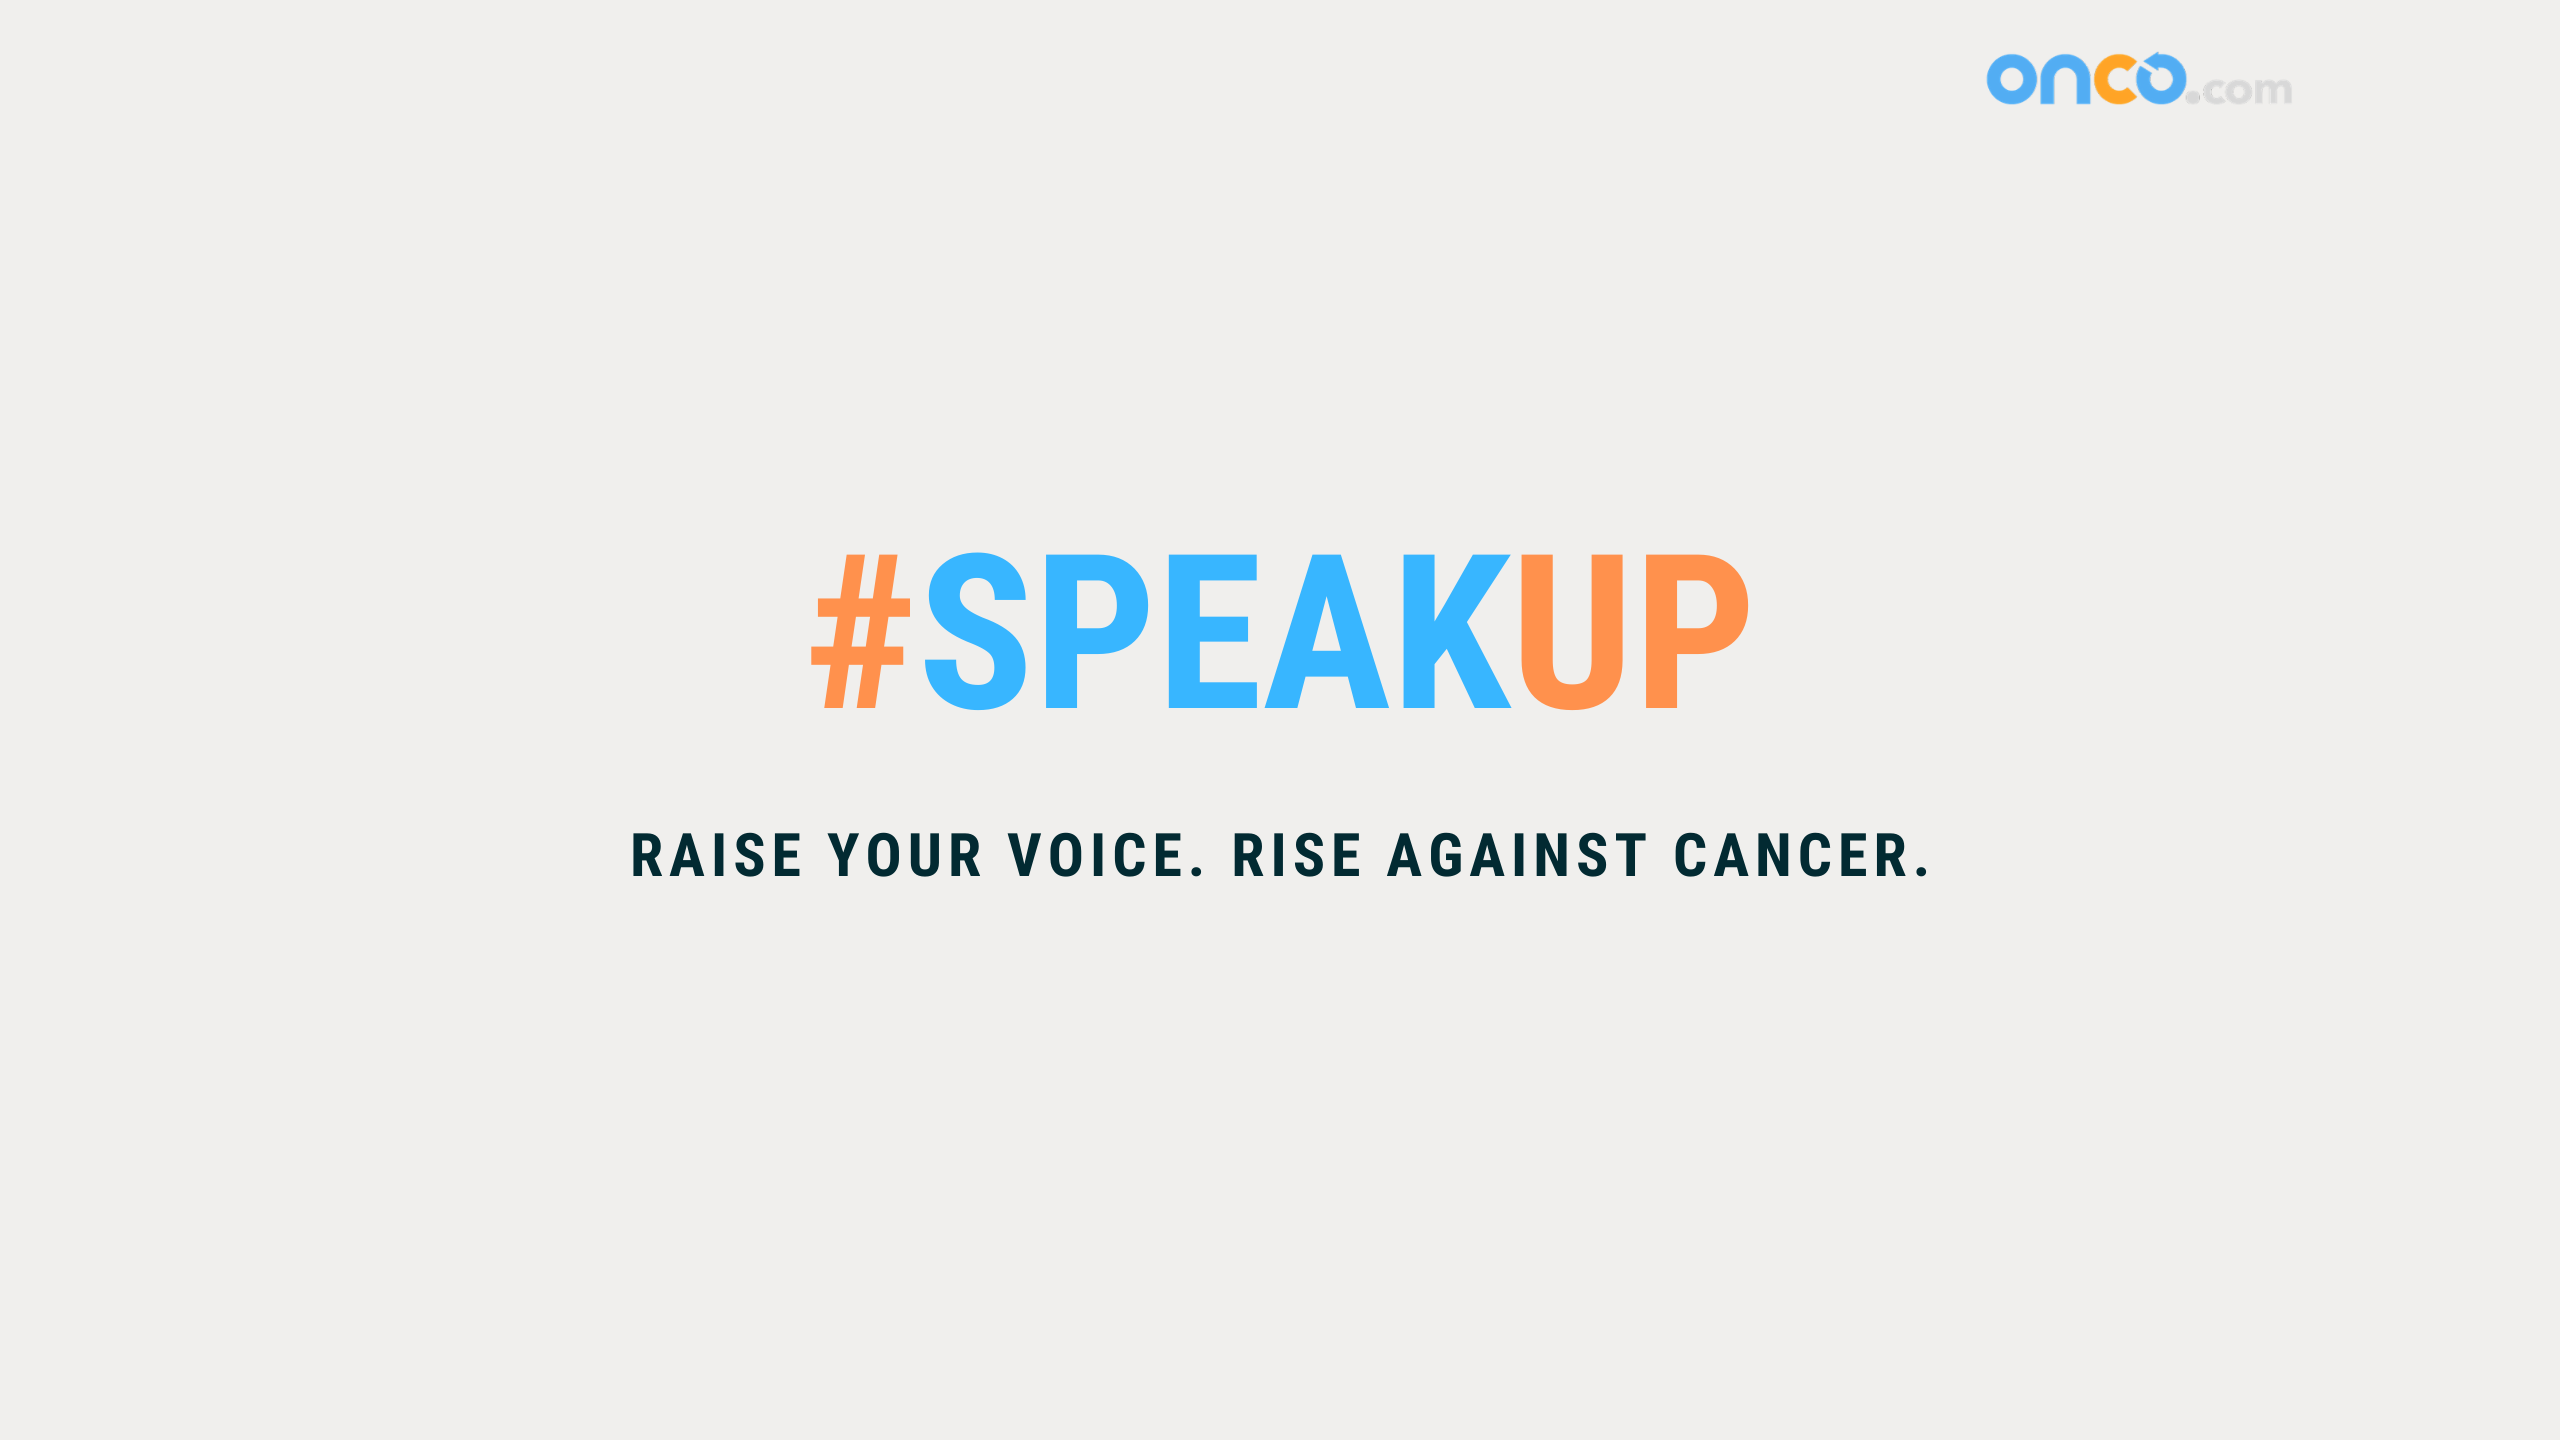 World Cancer Day 2020: Have you Joined the #SpeakUp Campaign Yet?